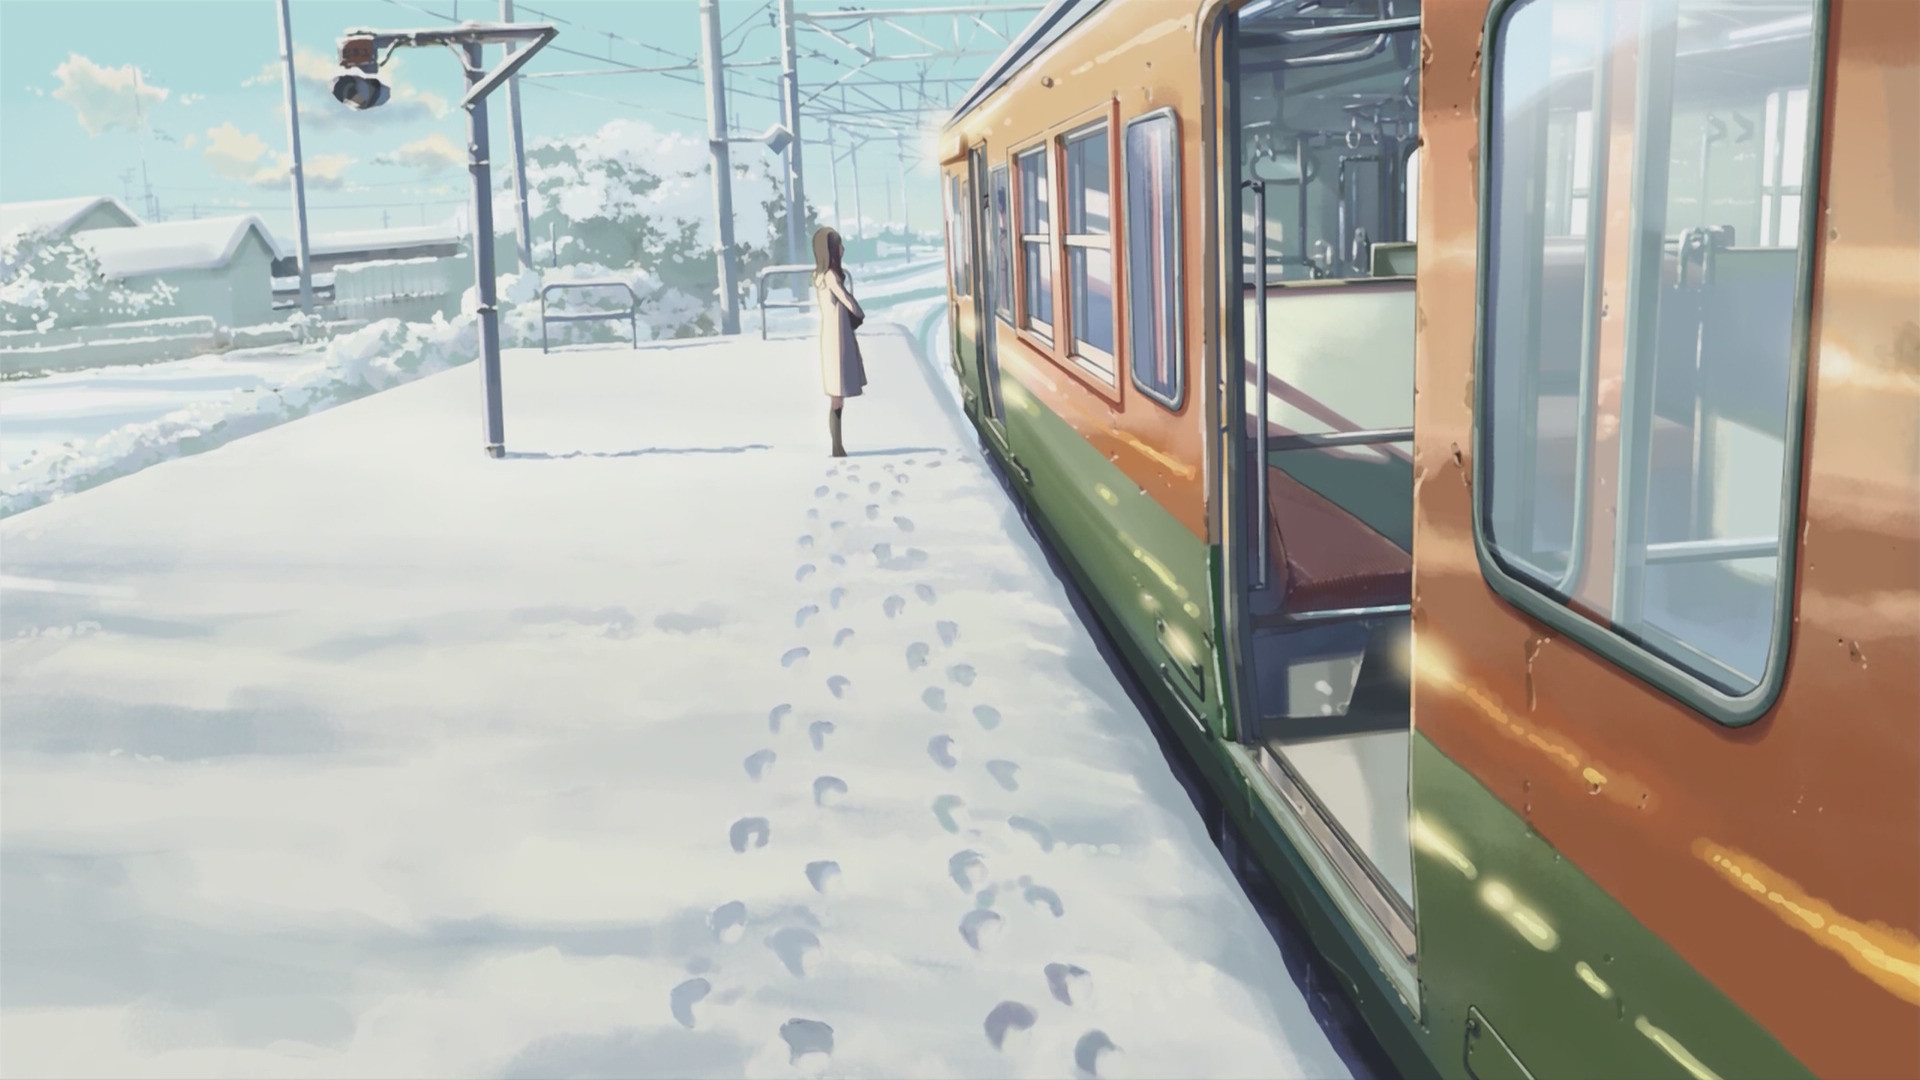 Aesthetic Anime Train Wallpapers - Wallpaper Cave